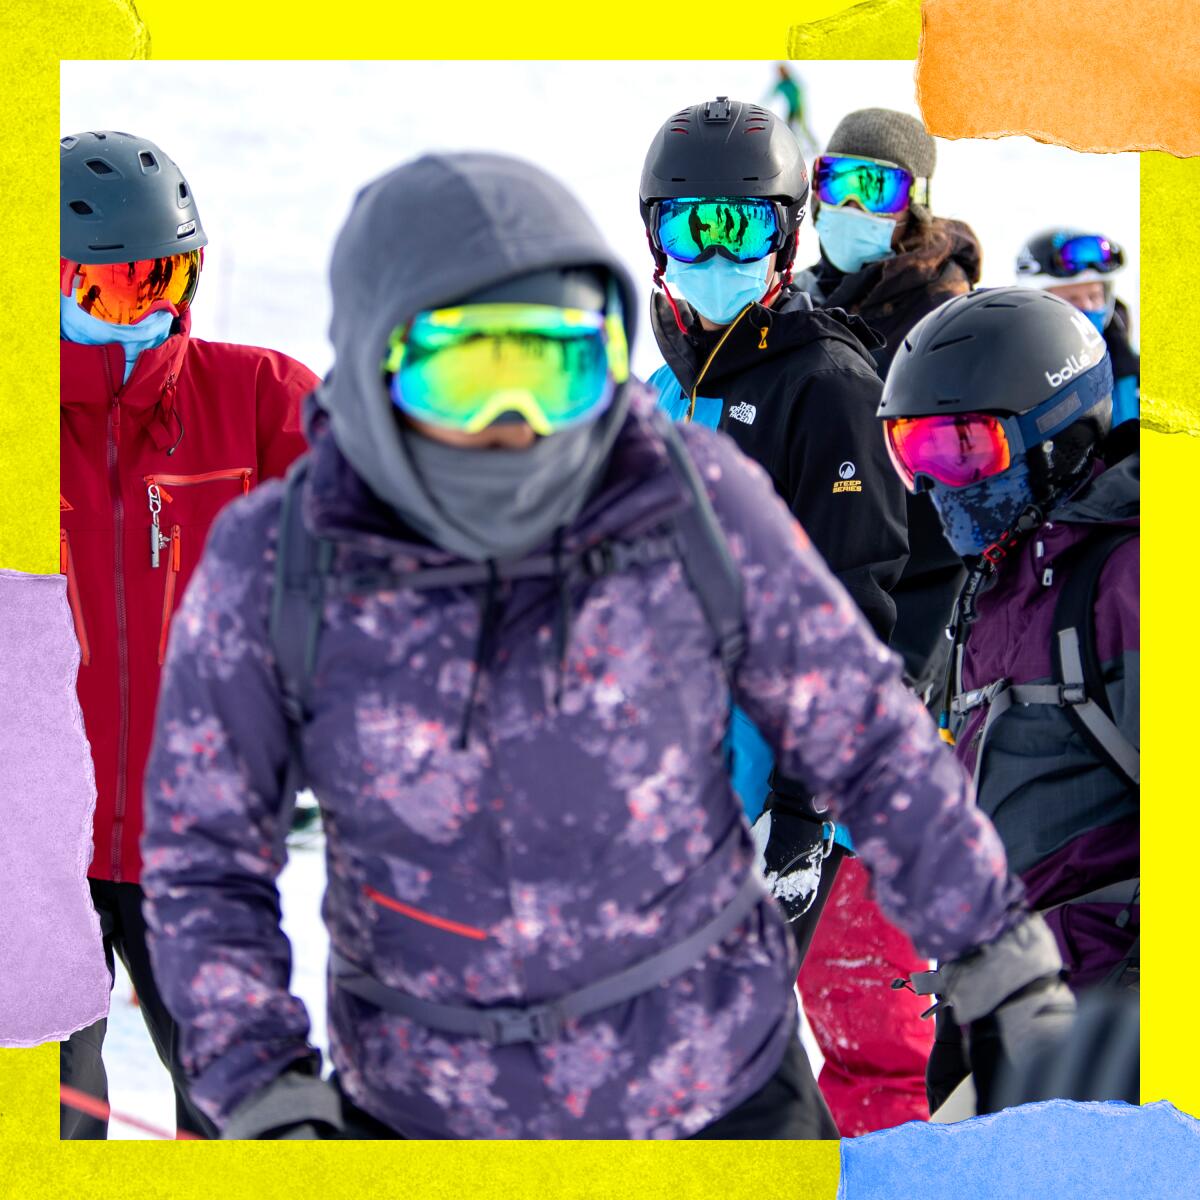 A crowd of people in ski gear, helmets and reflective goggles.